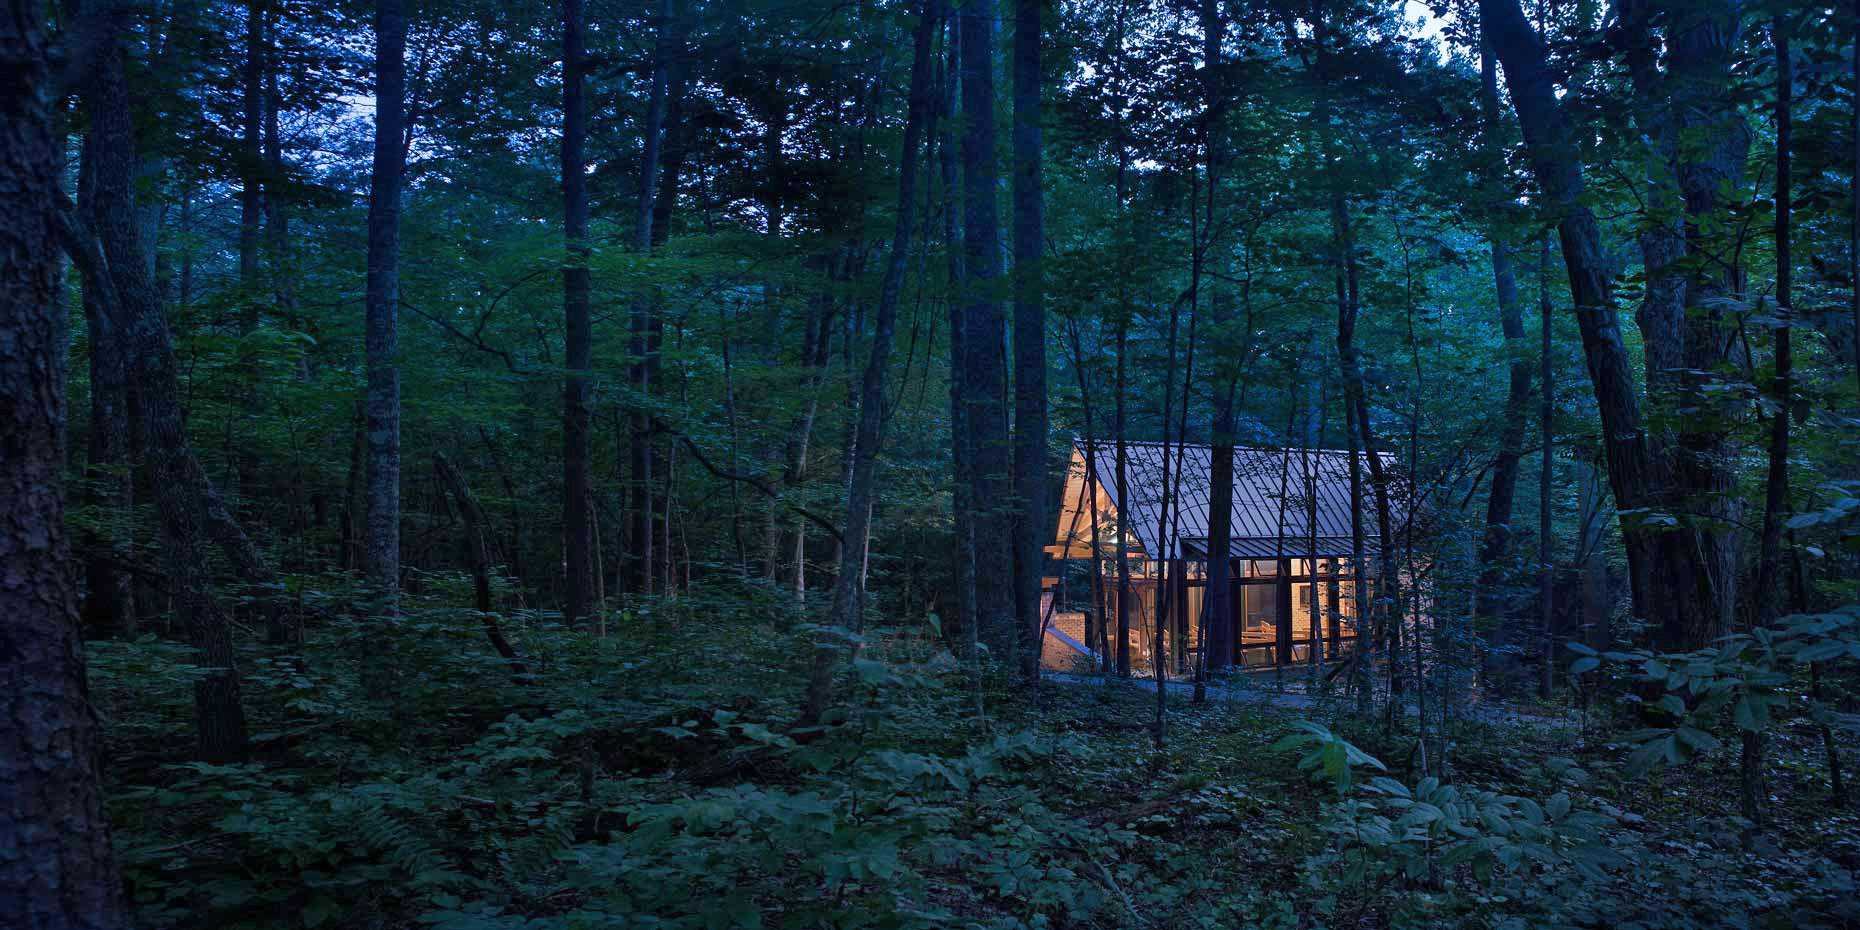 A view of the St. Francis Springs Outdoor Chapel situated in the woods at twilight